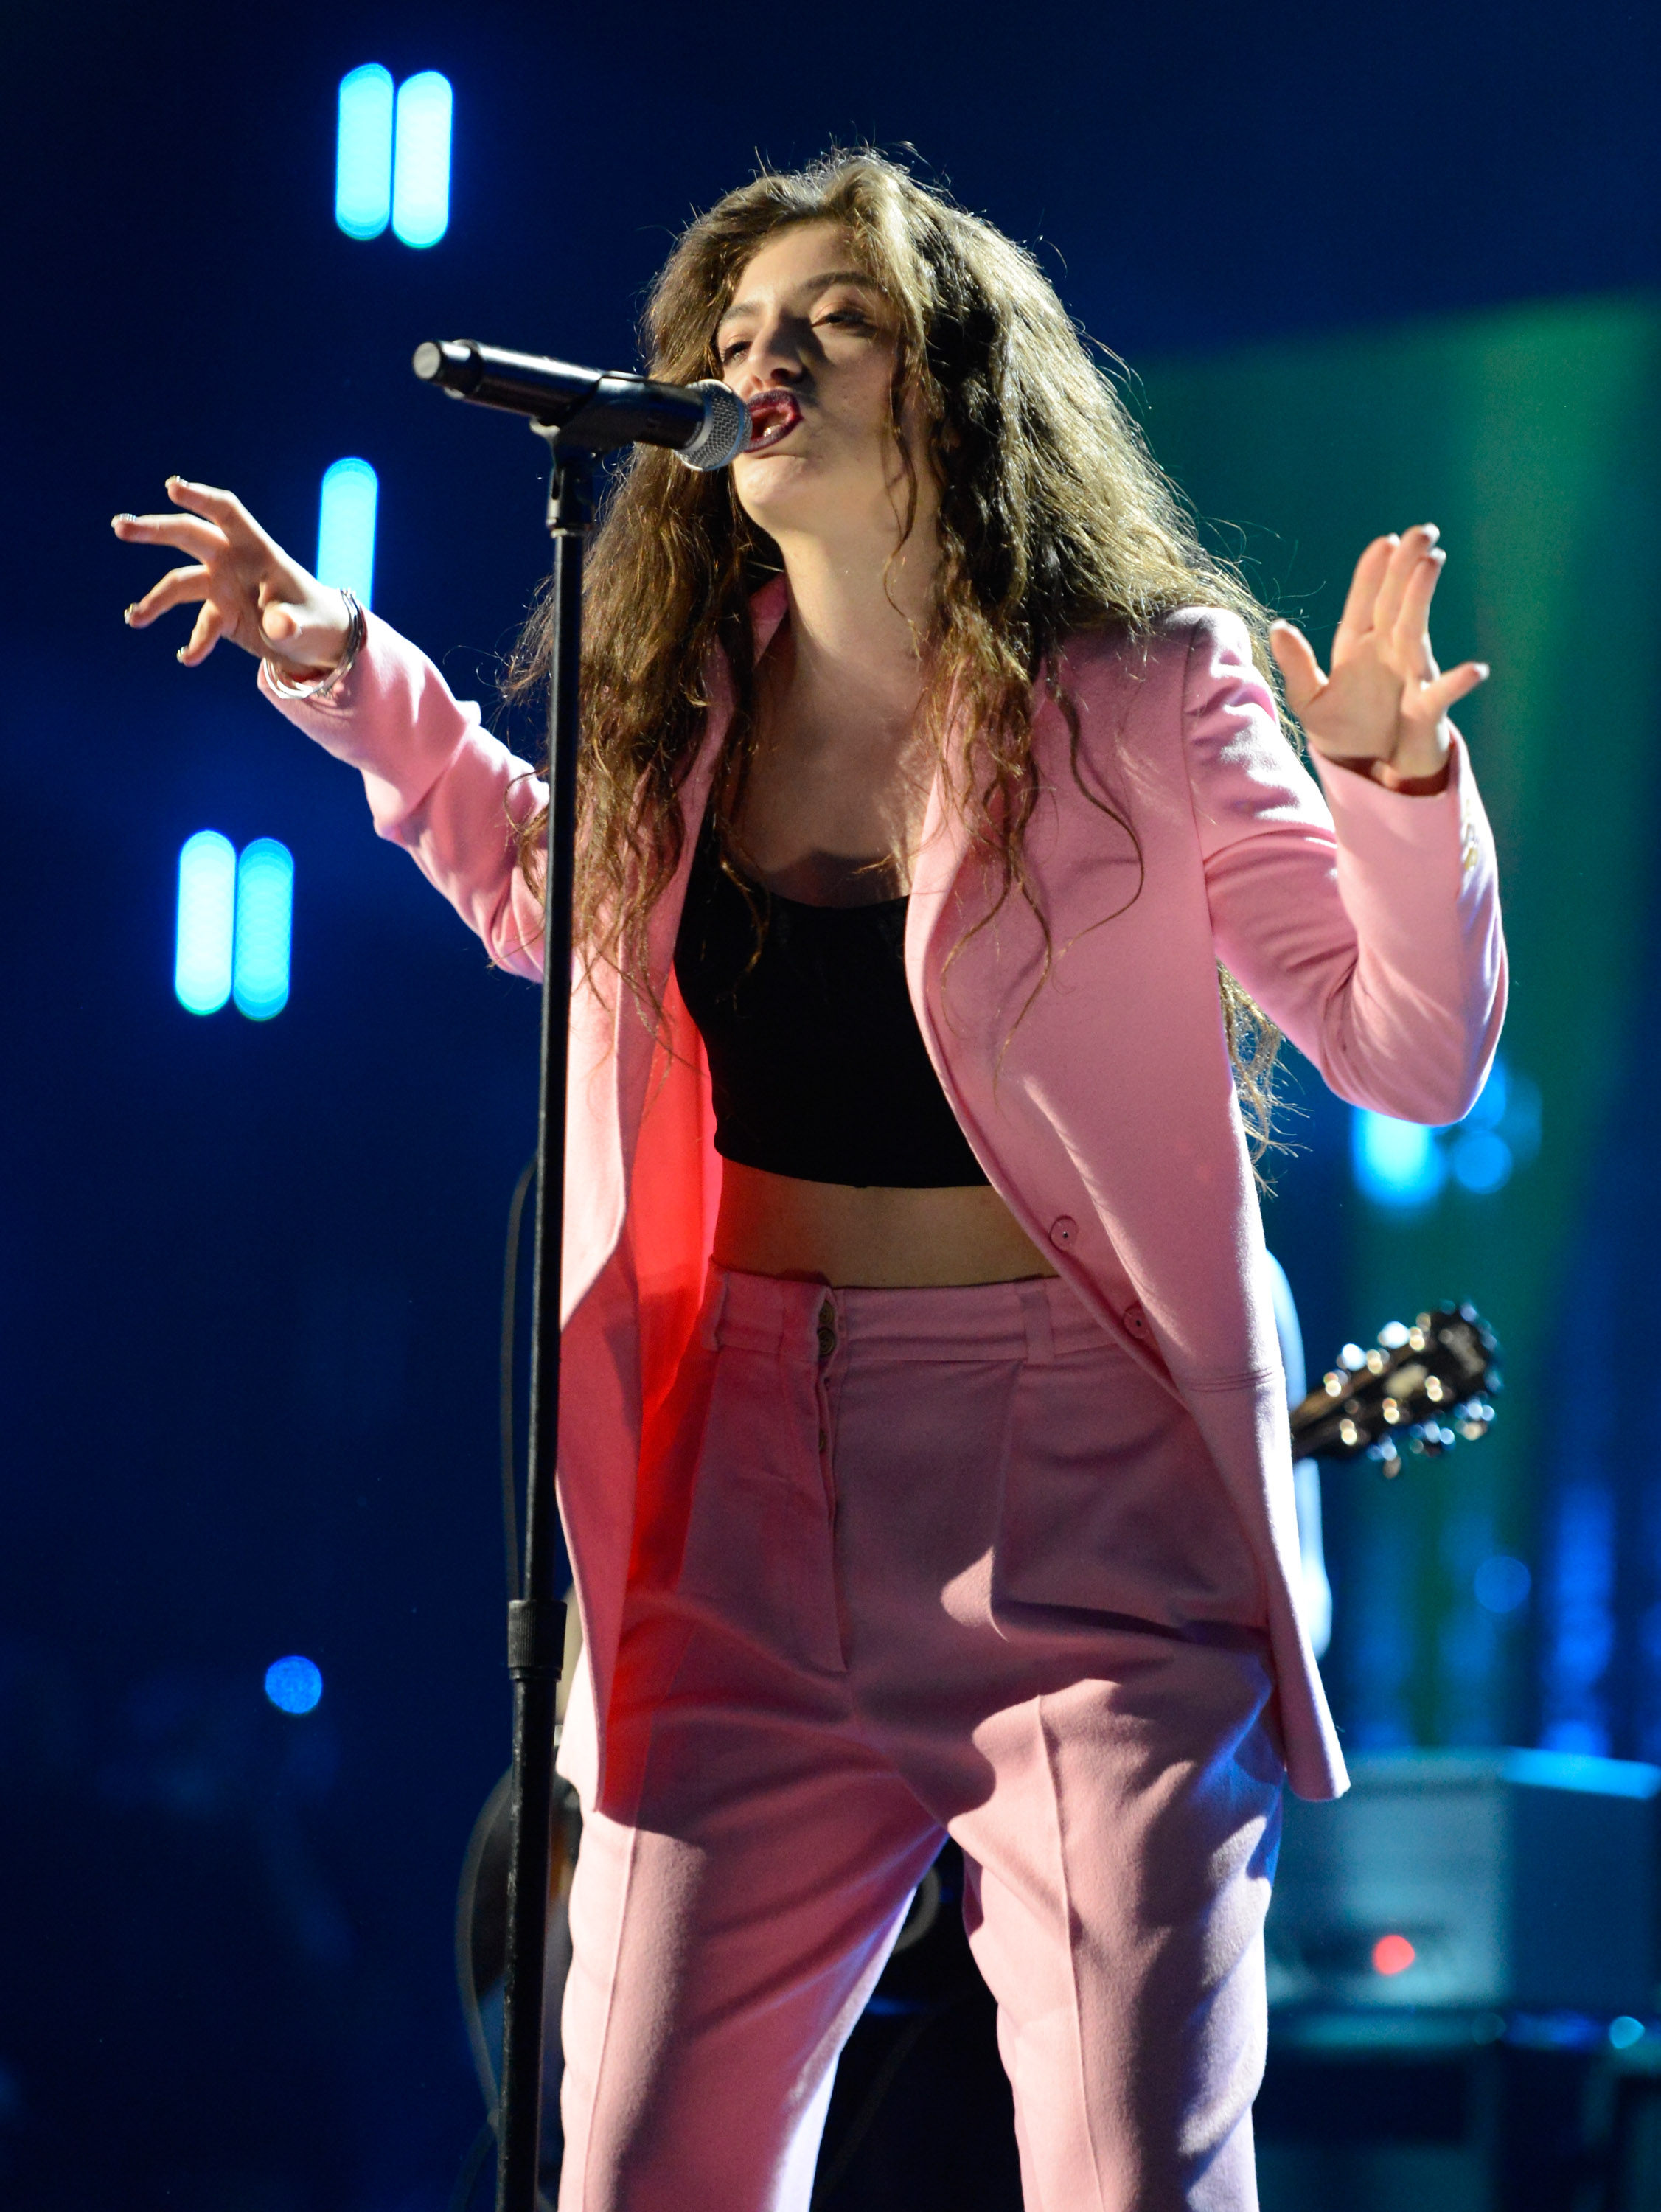 lorde singing into a microphone wearing a pink suit 2014